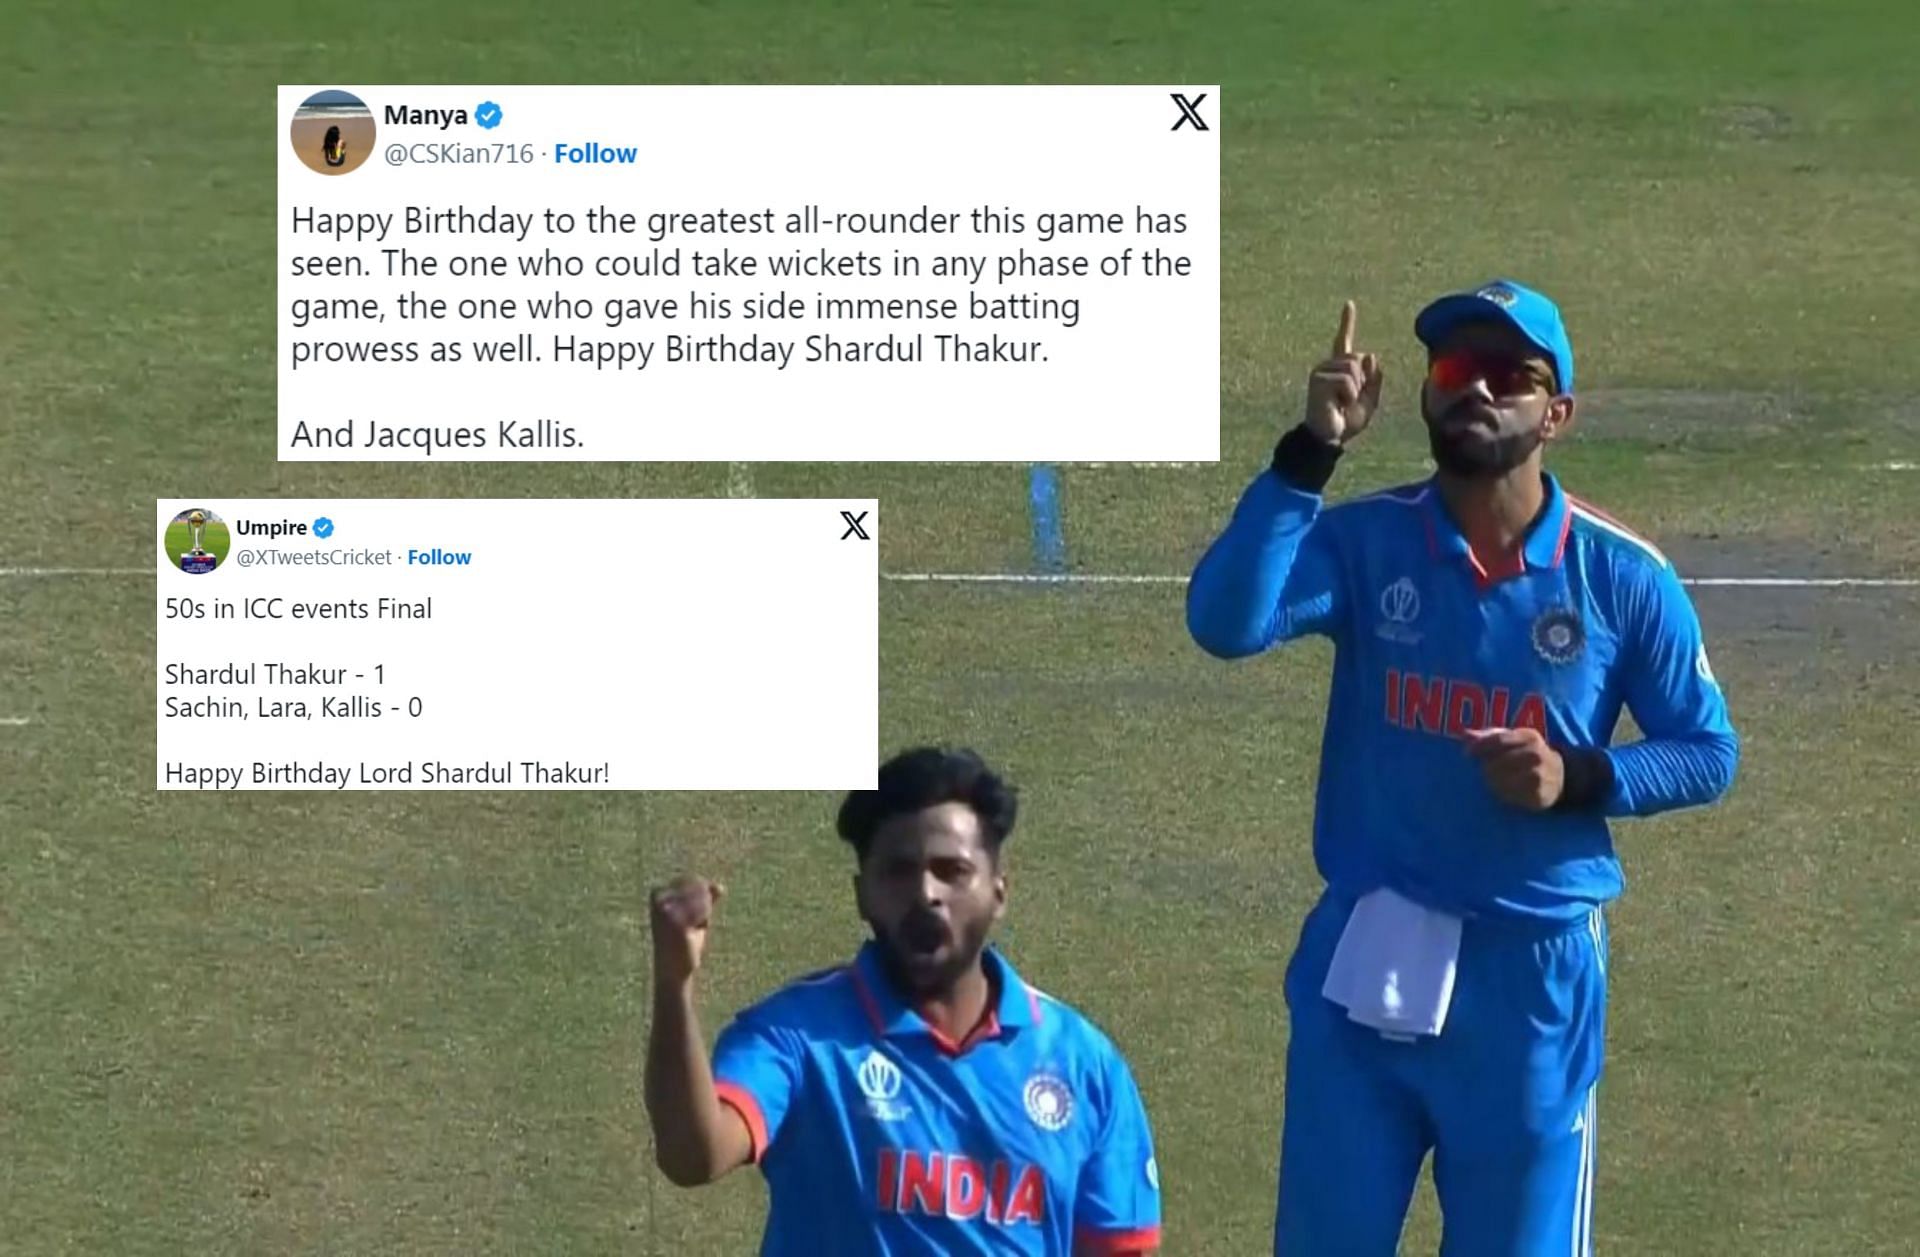 Shardul Thakur receives special wishes as he turned 32 today.